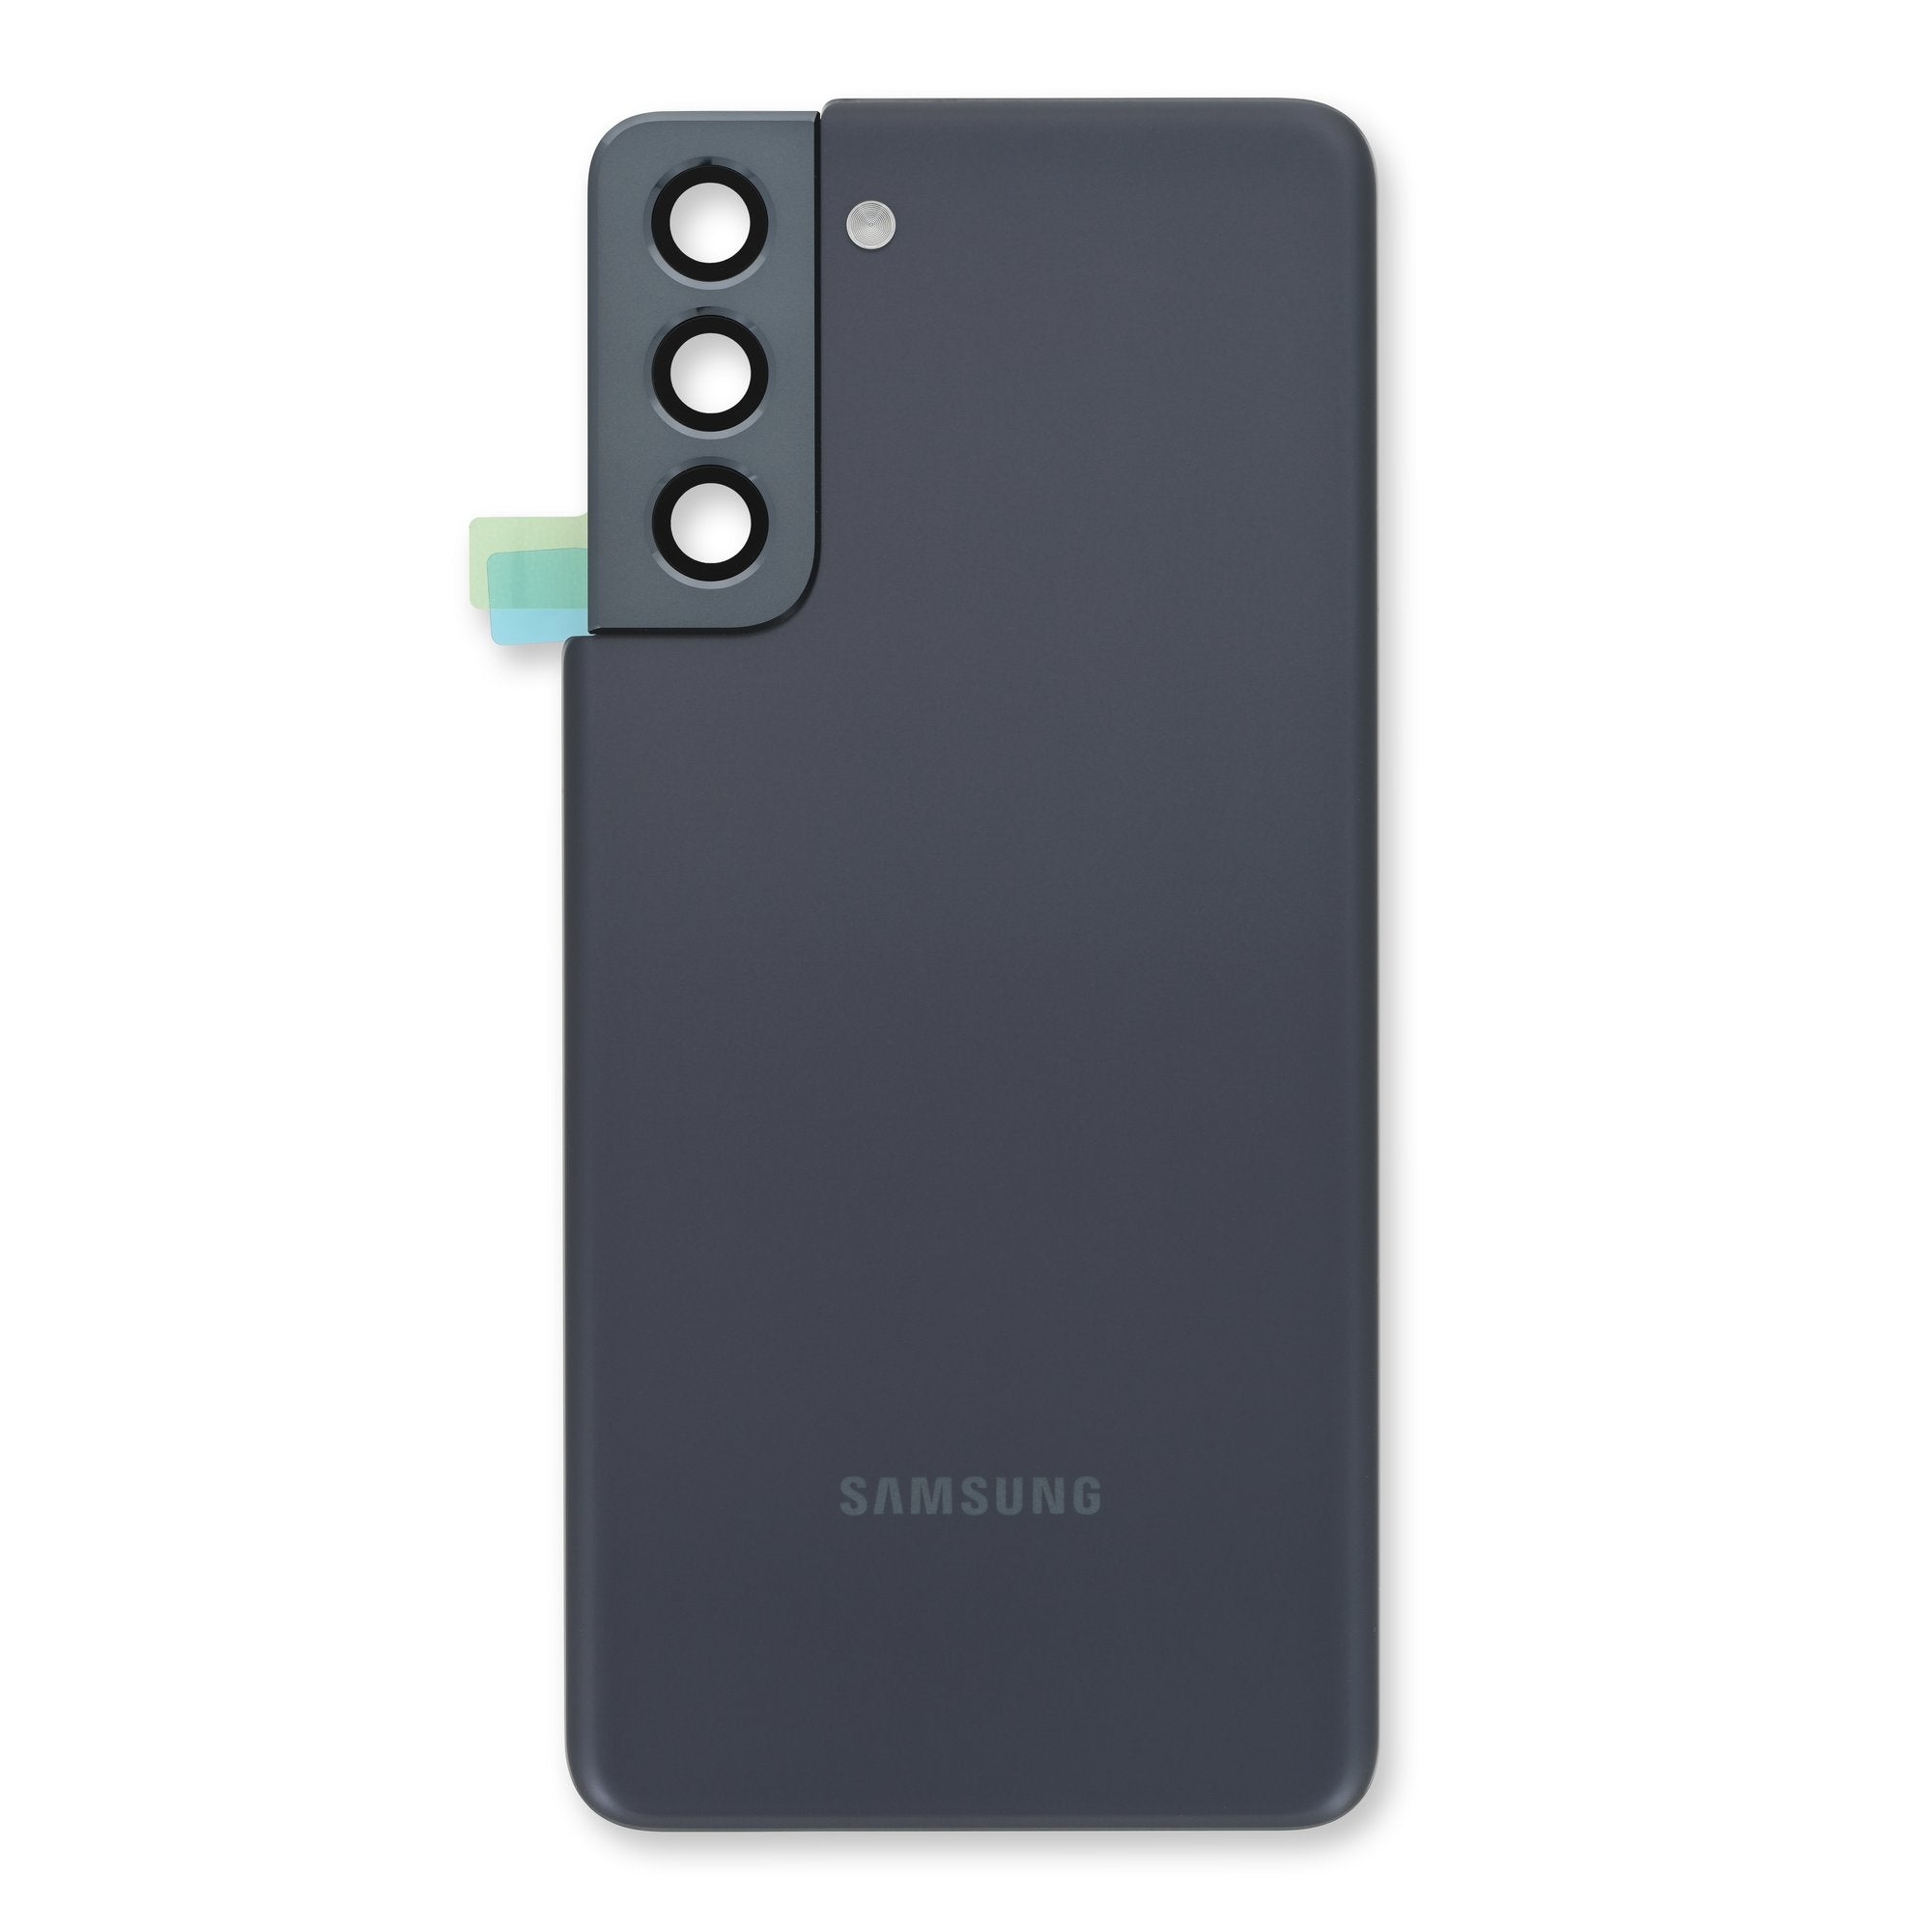 Samsung Galaxy S21 5G (USA) Back Cover - Genuine Gray New Part Only